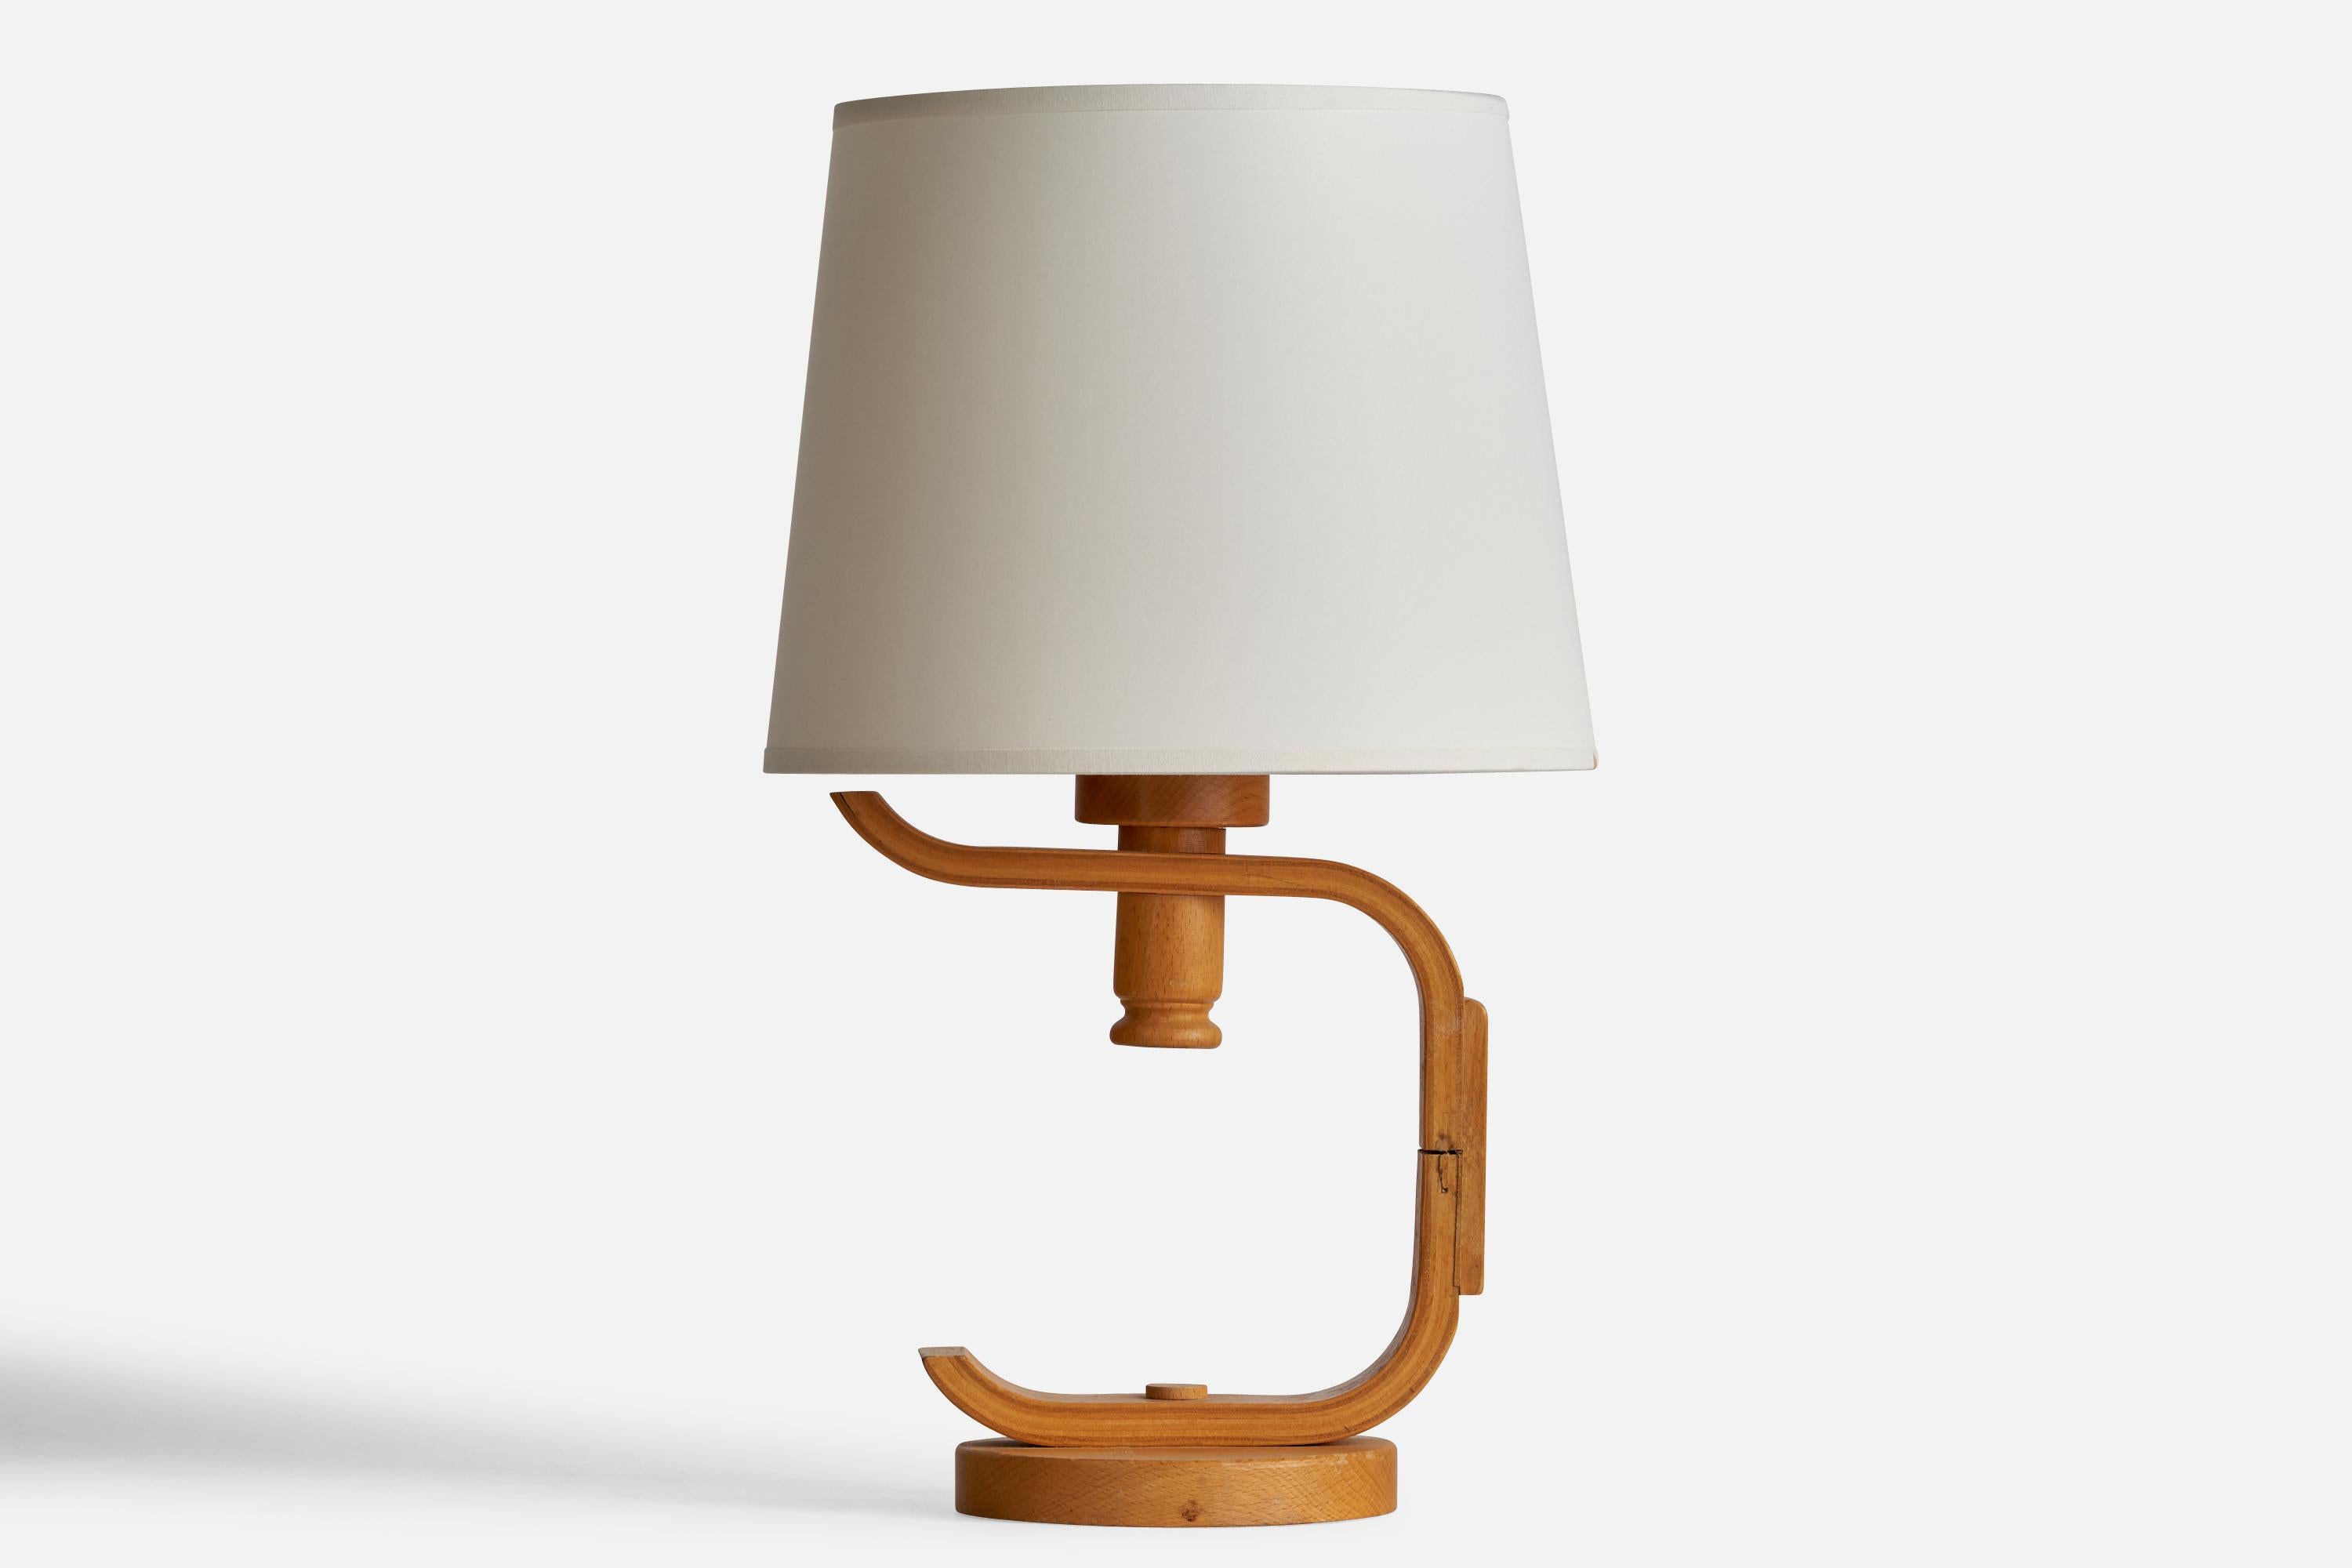 A moulded pine table lamp designed and produced in Sweden, 1970s.

Dimensions of Lamp (inches): 11” H x 8” Diameter
Dimensions of Shade (inches): 8”Top Diameter x 10” Bottom Diameter x 8” H
Dimensions of Lamp with Shade (inches): 17” H x 10”